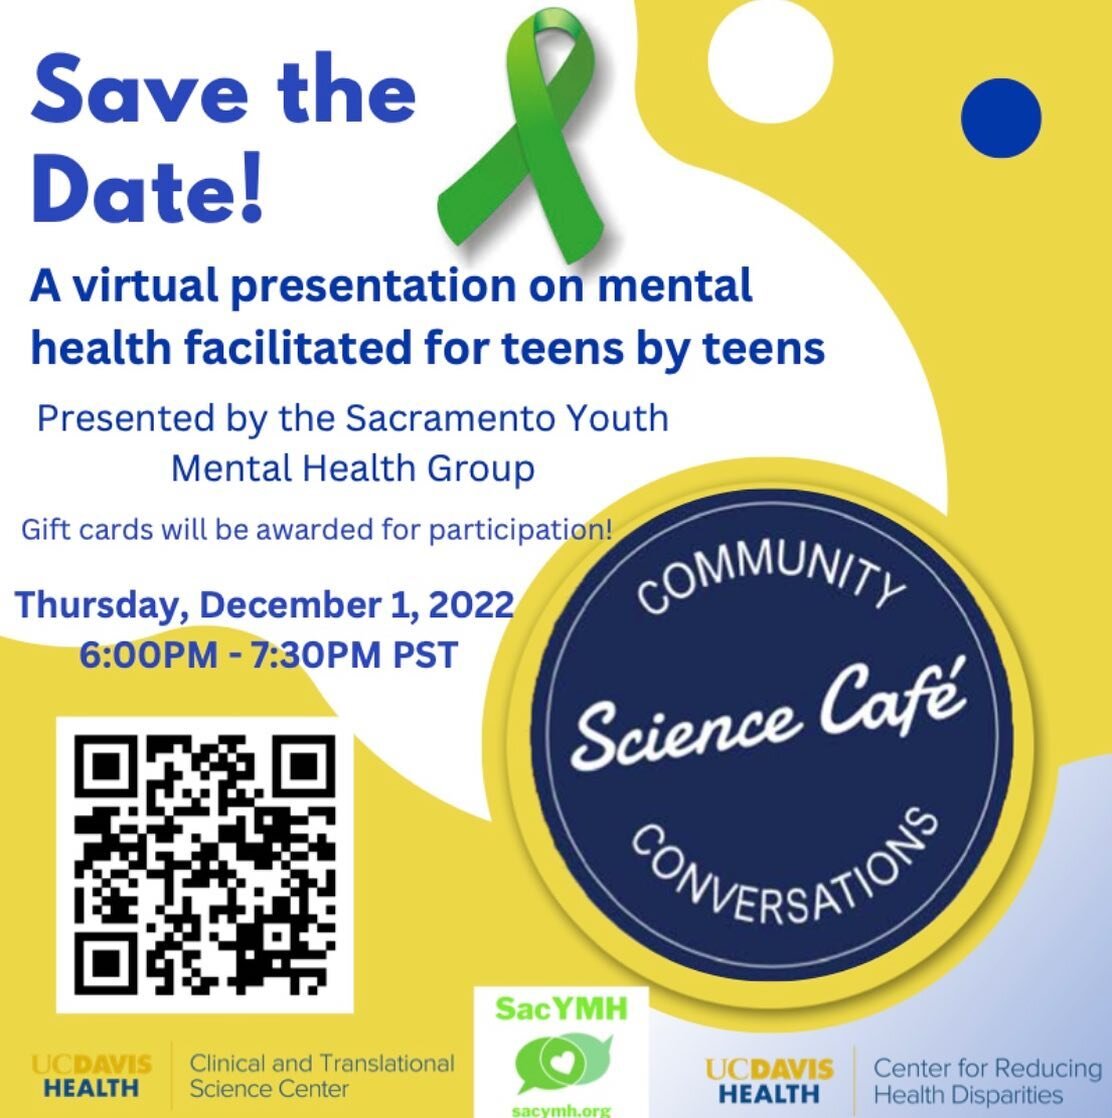 UNMASKED: Youth Mental Health Needs and Solutions 

When: Thursday, December 1st 6-7:30 pm PT

What: In partnership with the UC Davis Center for Reducing Health Disparities, we will be hosting a virtual discussion for teens on their mental health nee